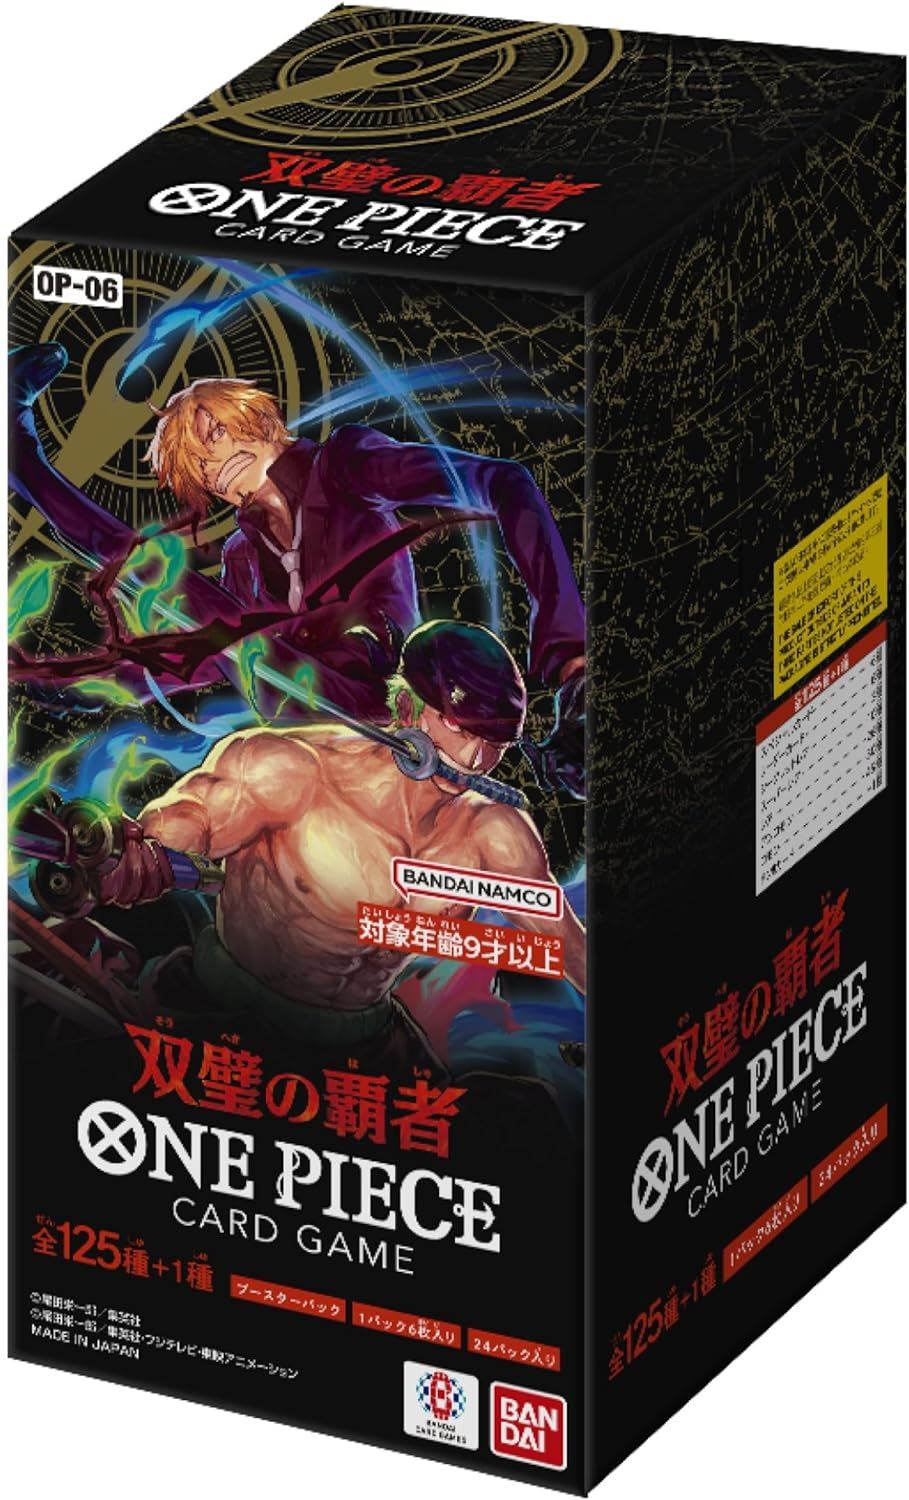 One Piece Card Game Booster Pack OP-06 (Set of 24 Packs) (Re-run) Bandai